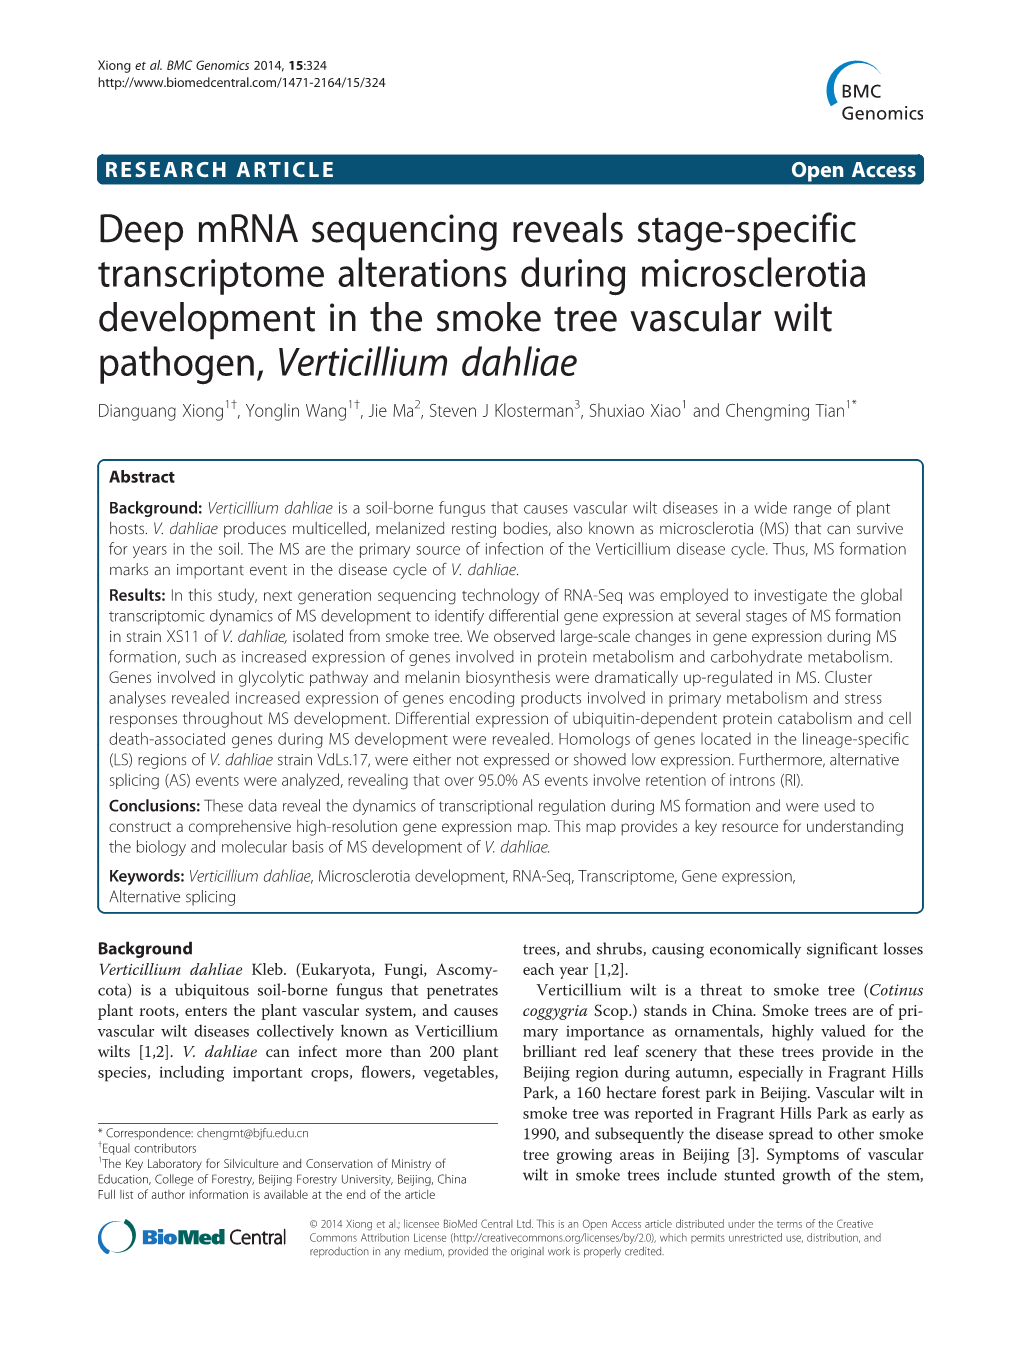 Deep Mrna Sequencing Reveals Stage-Specific Transcriptome